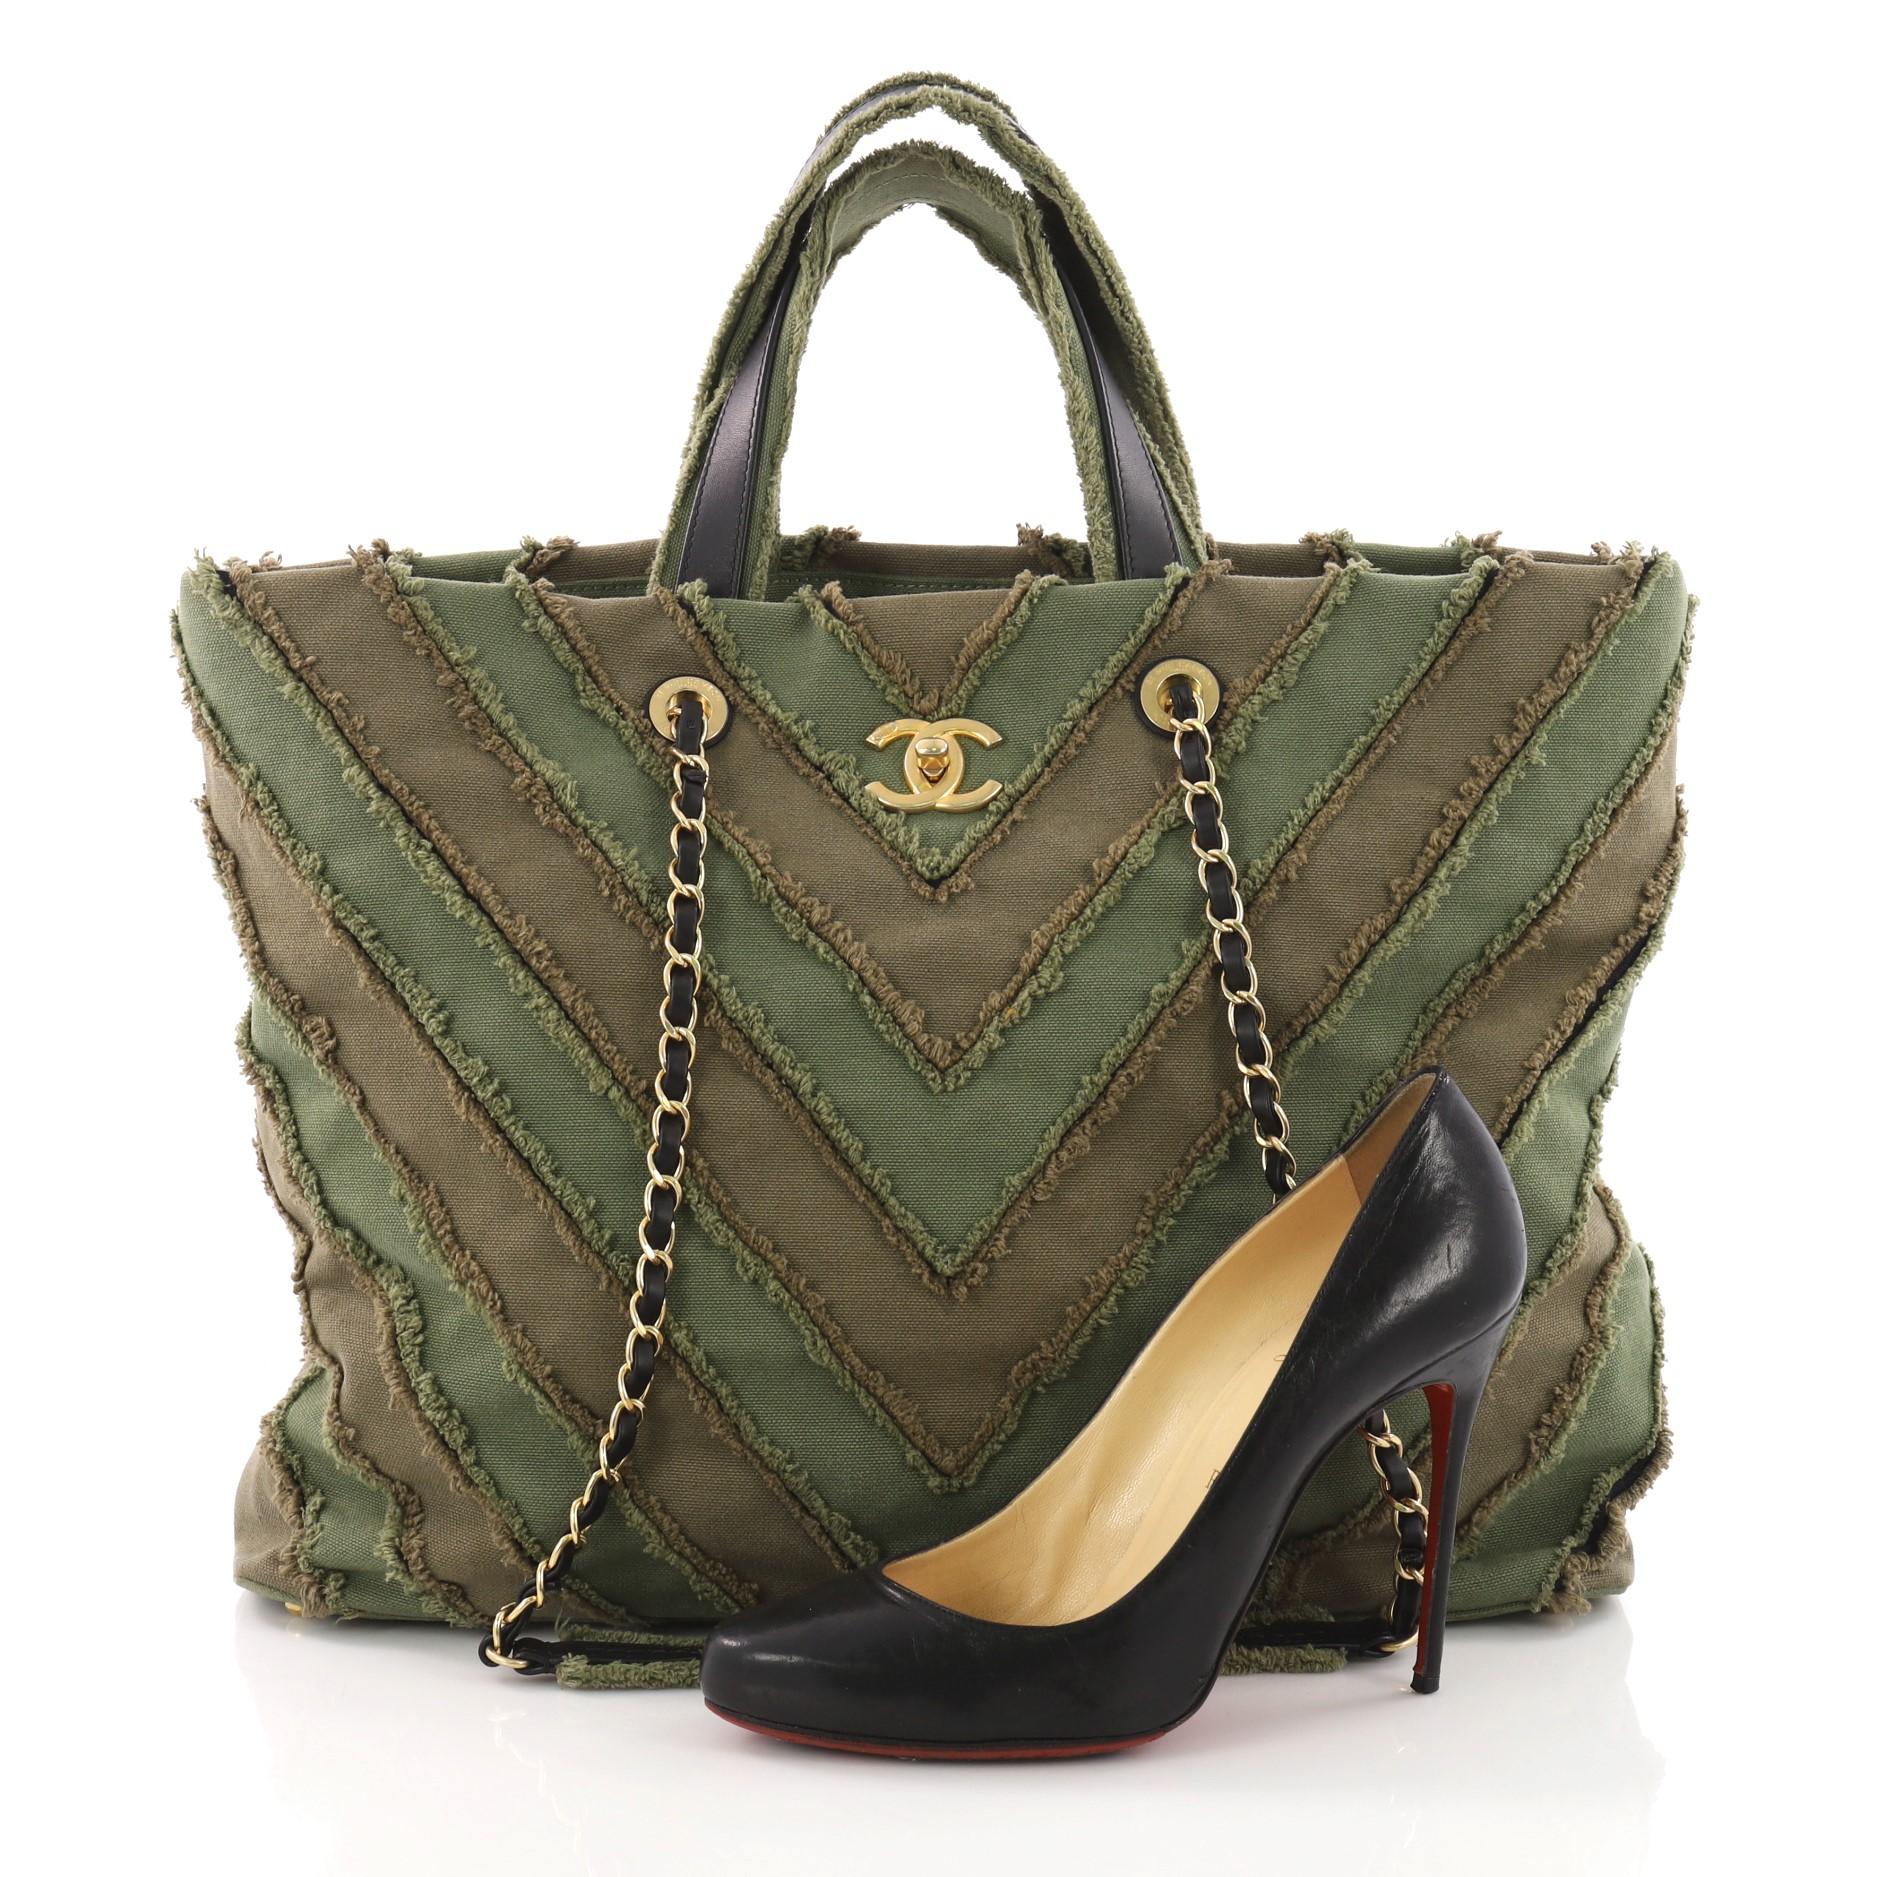 This authentic Chanel Shopping Tote Chevron Canvas Patchwork Large is from the brand's Cruise 2017 Cuba Collection. Crafted from green chevron patchwork canvas, this bag features dual top handles, woven-in leather chain straps with shoulder pads,